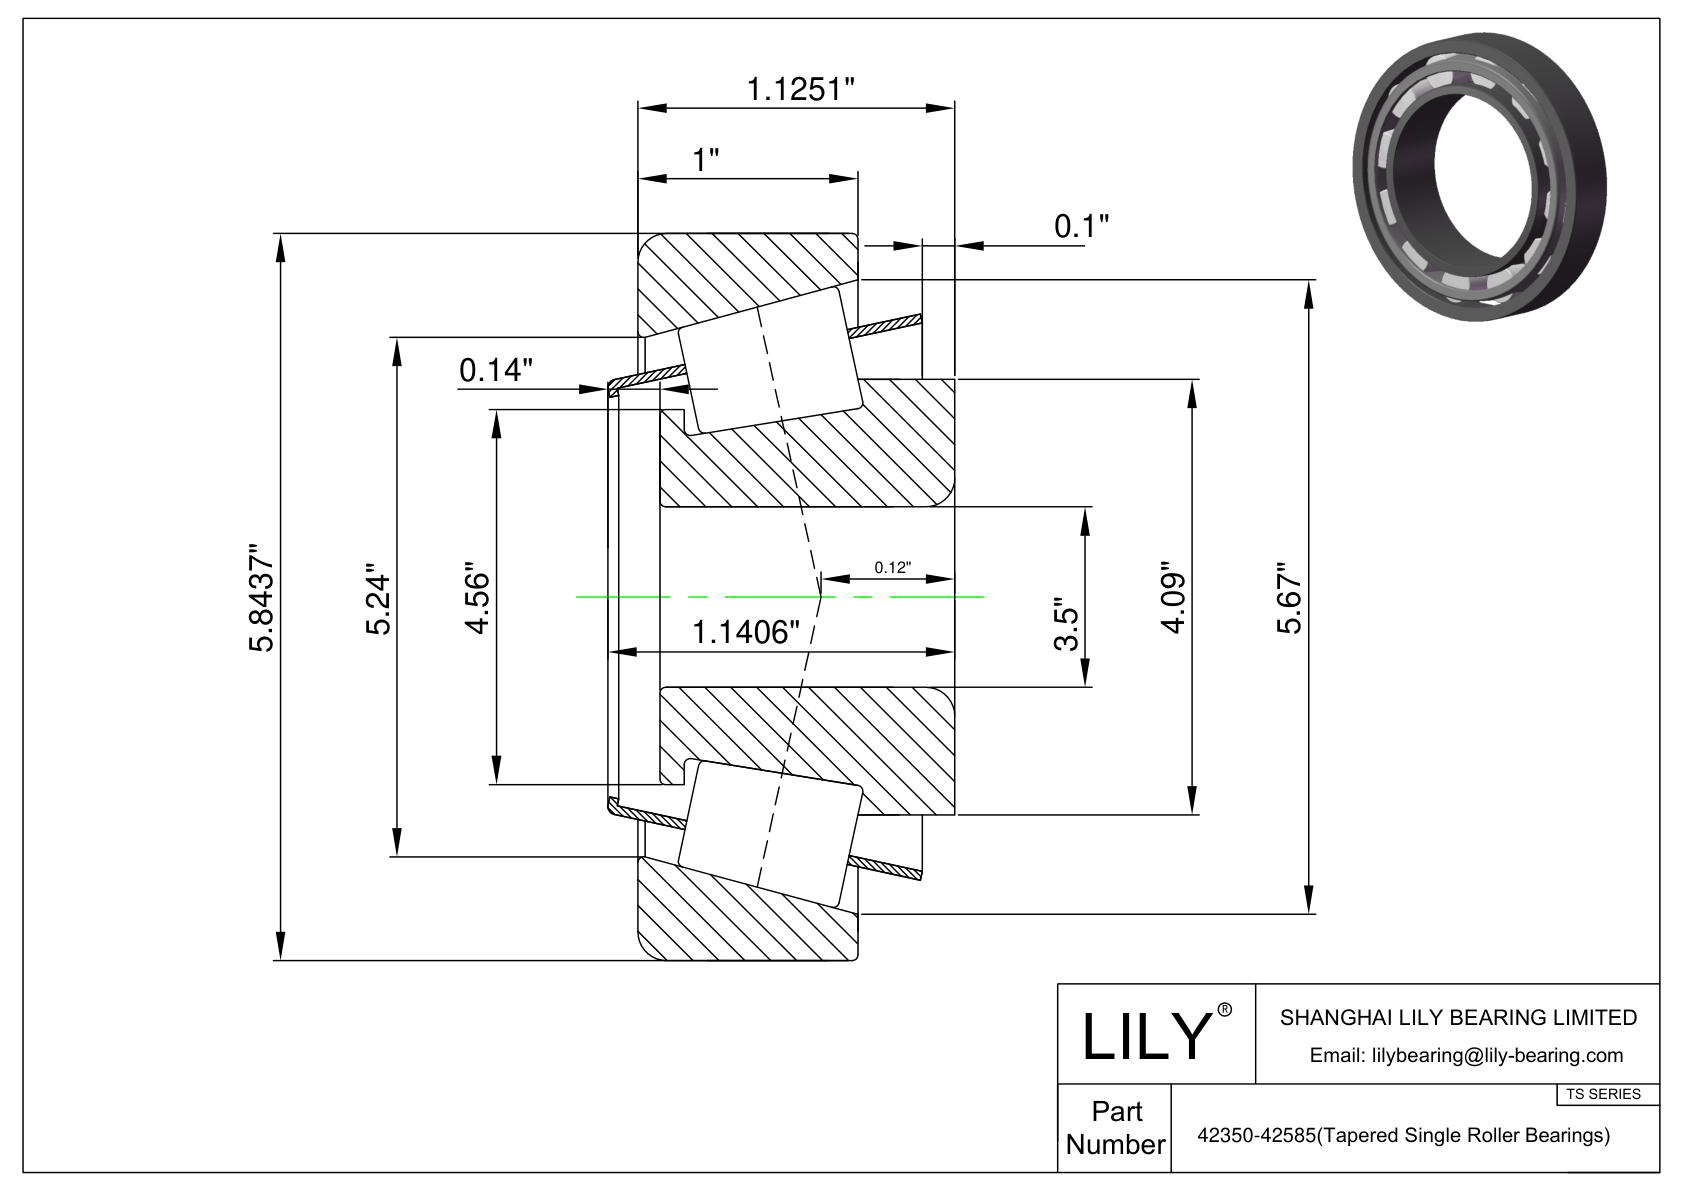 42350-42585 TS (Tapered Single Roller Bearings) (Imperial) cad drawing